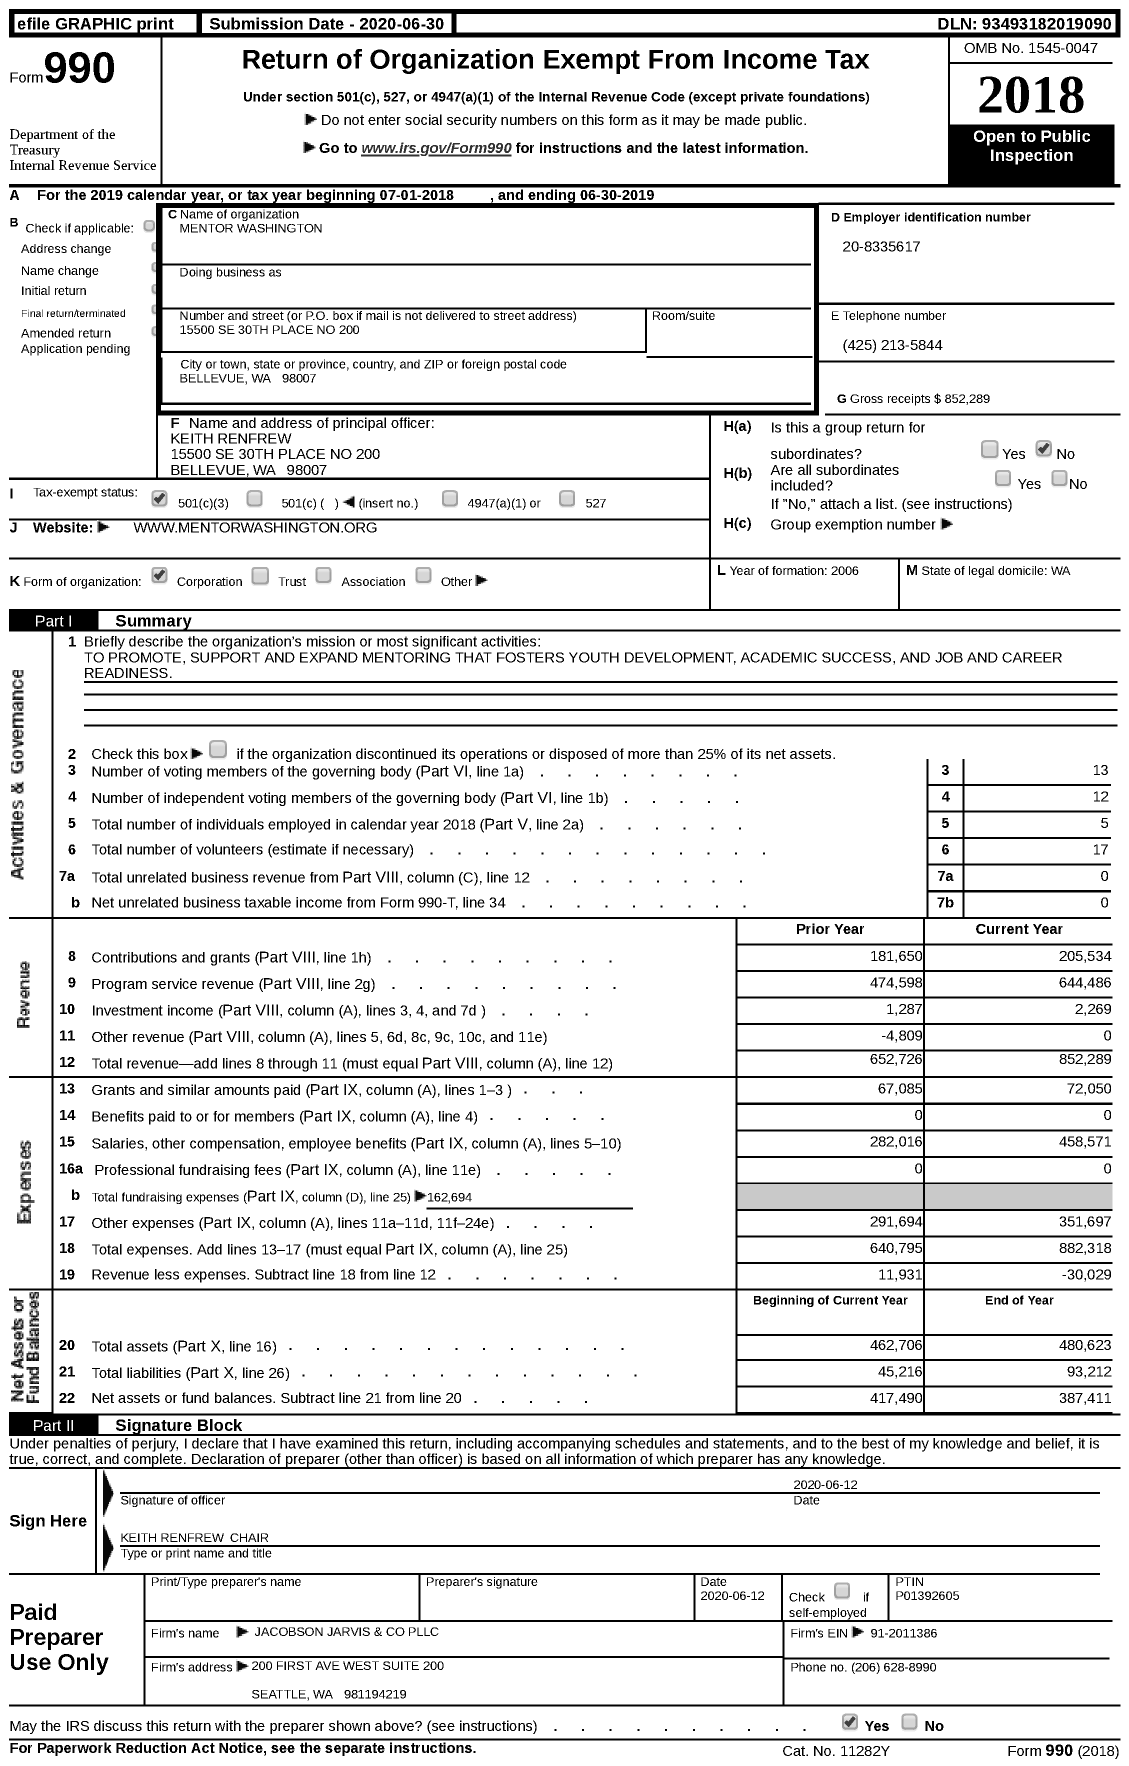 Image of first page of 2018 Form 990 for Mentor Washington